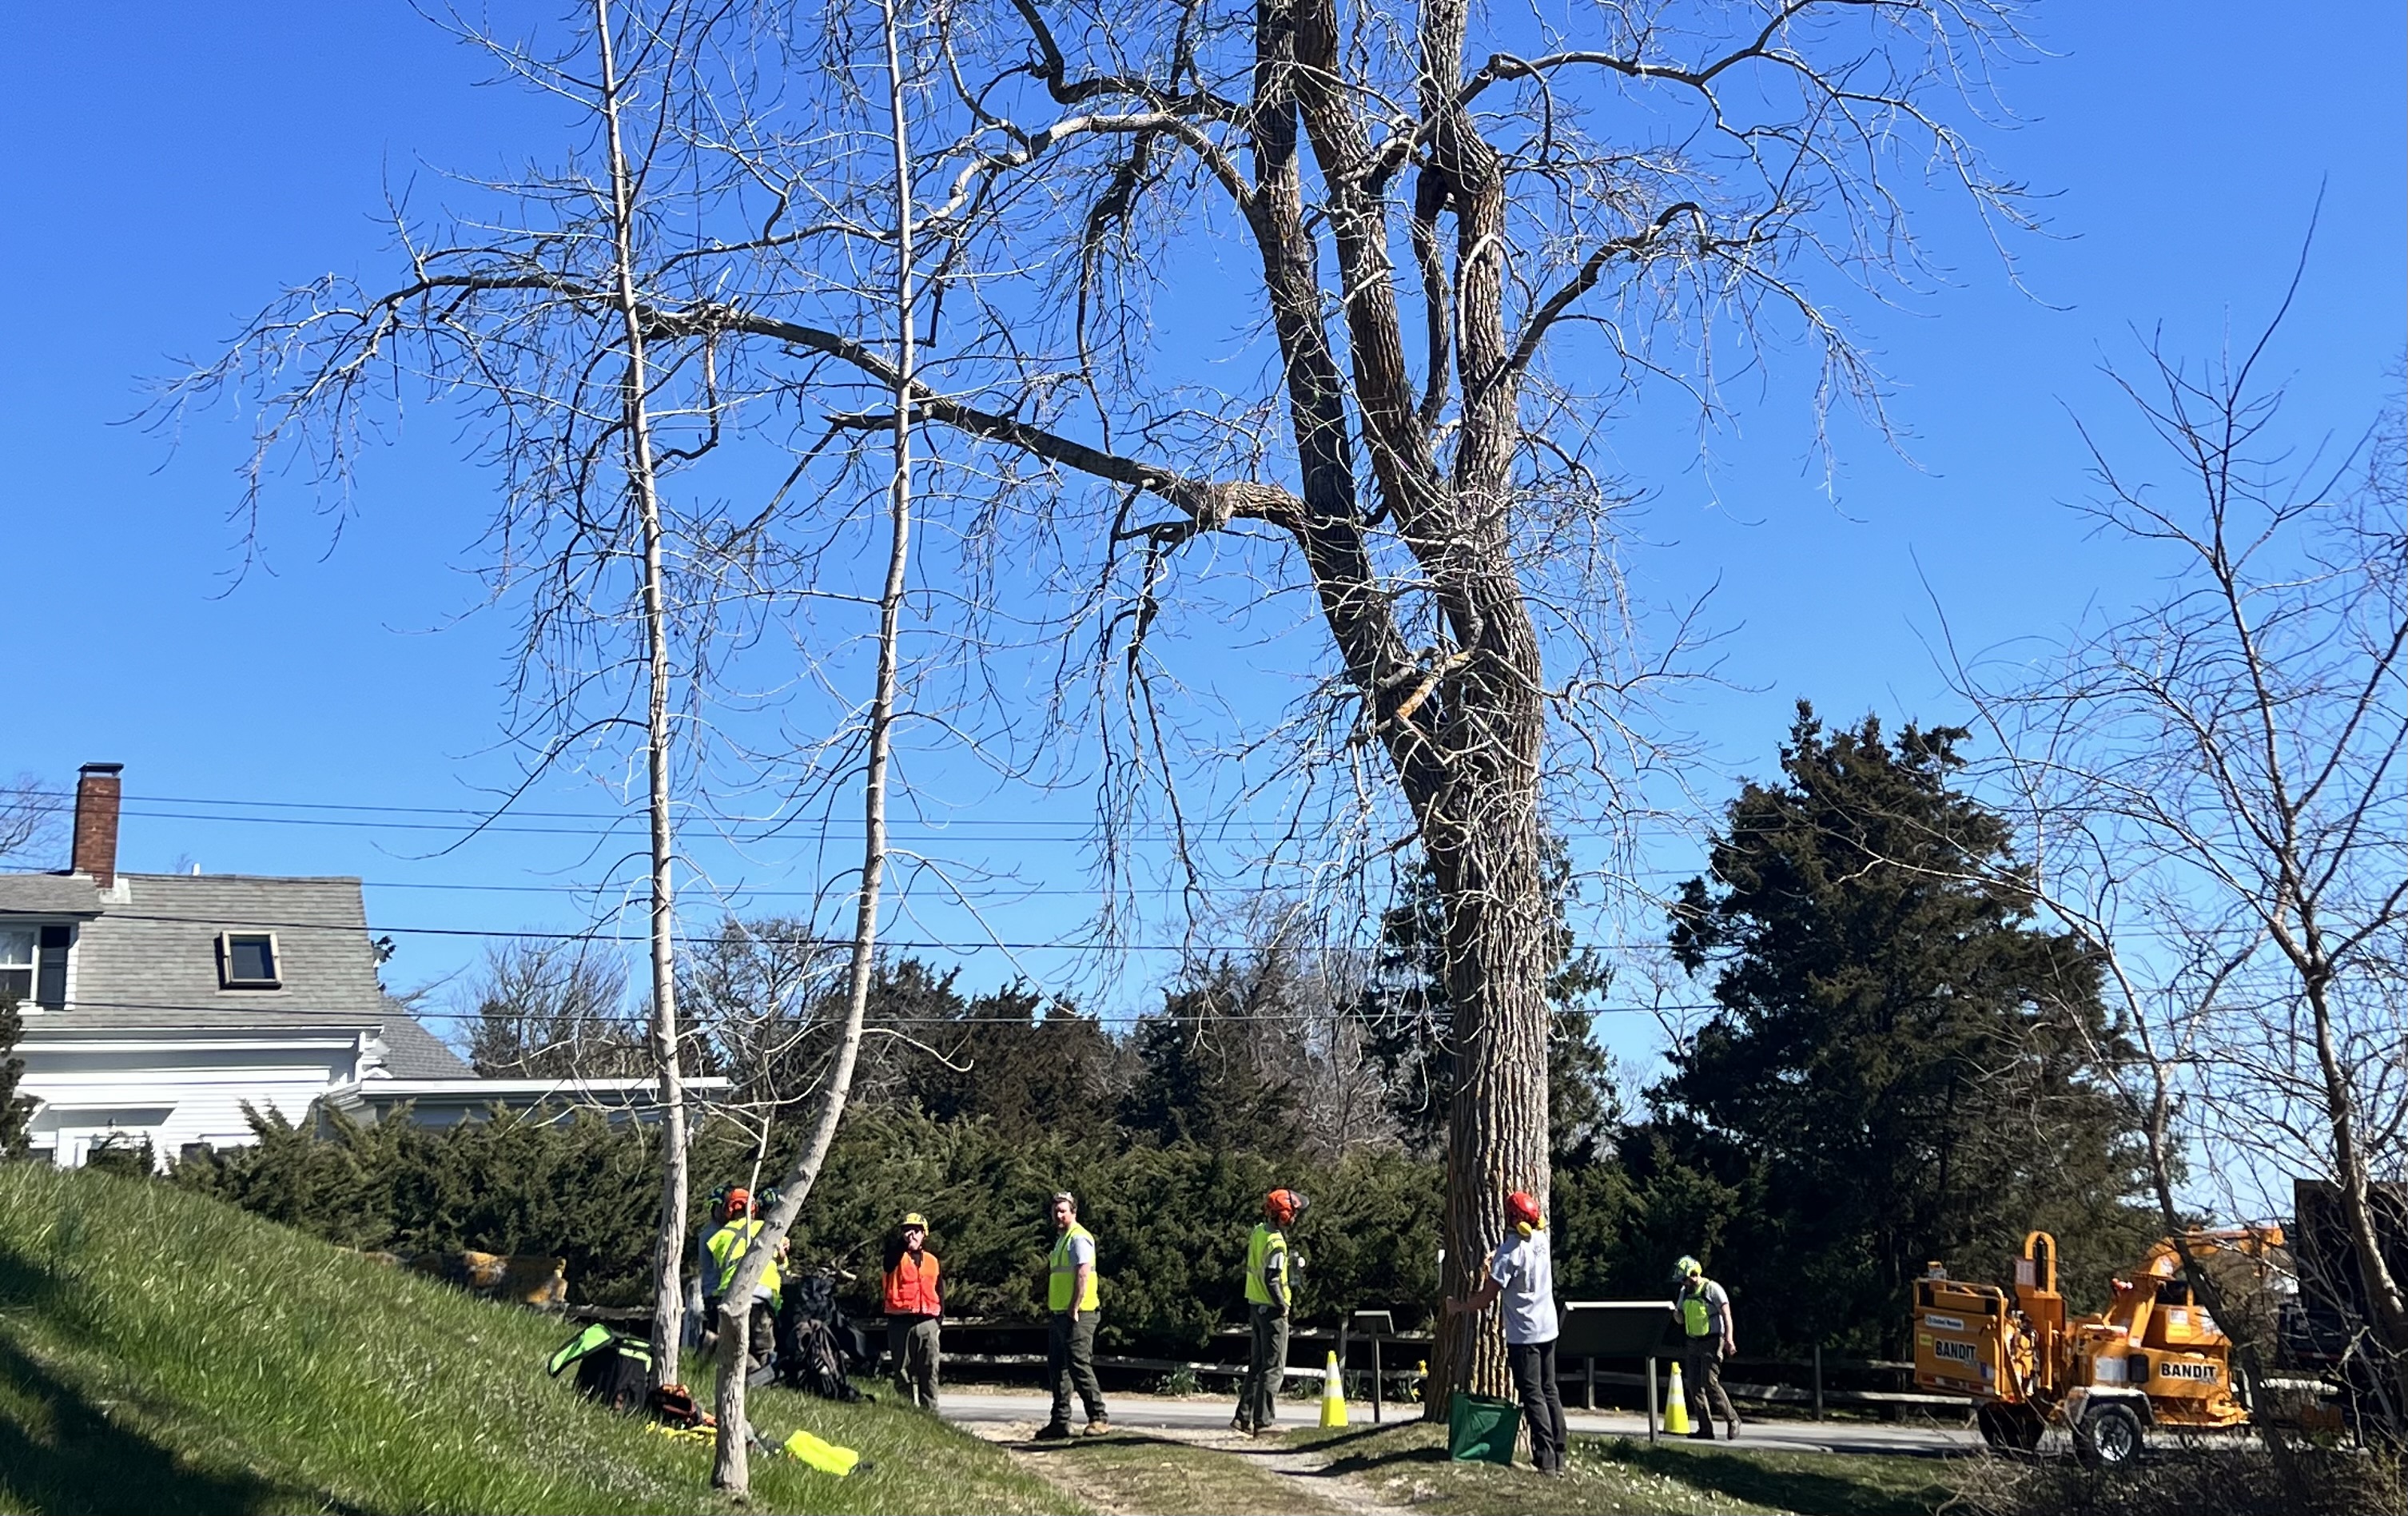 Park staff work around a tall tree to prune branches. Blue sky in background.